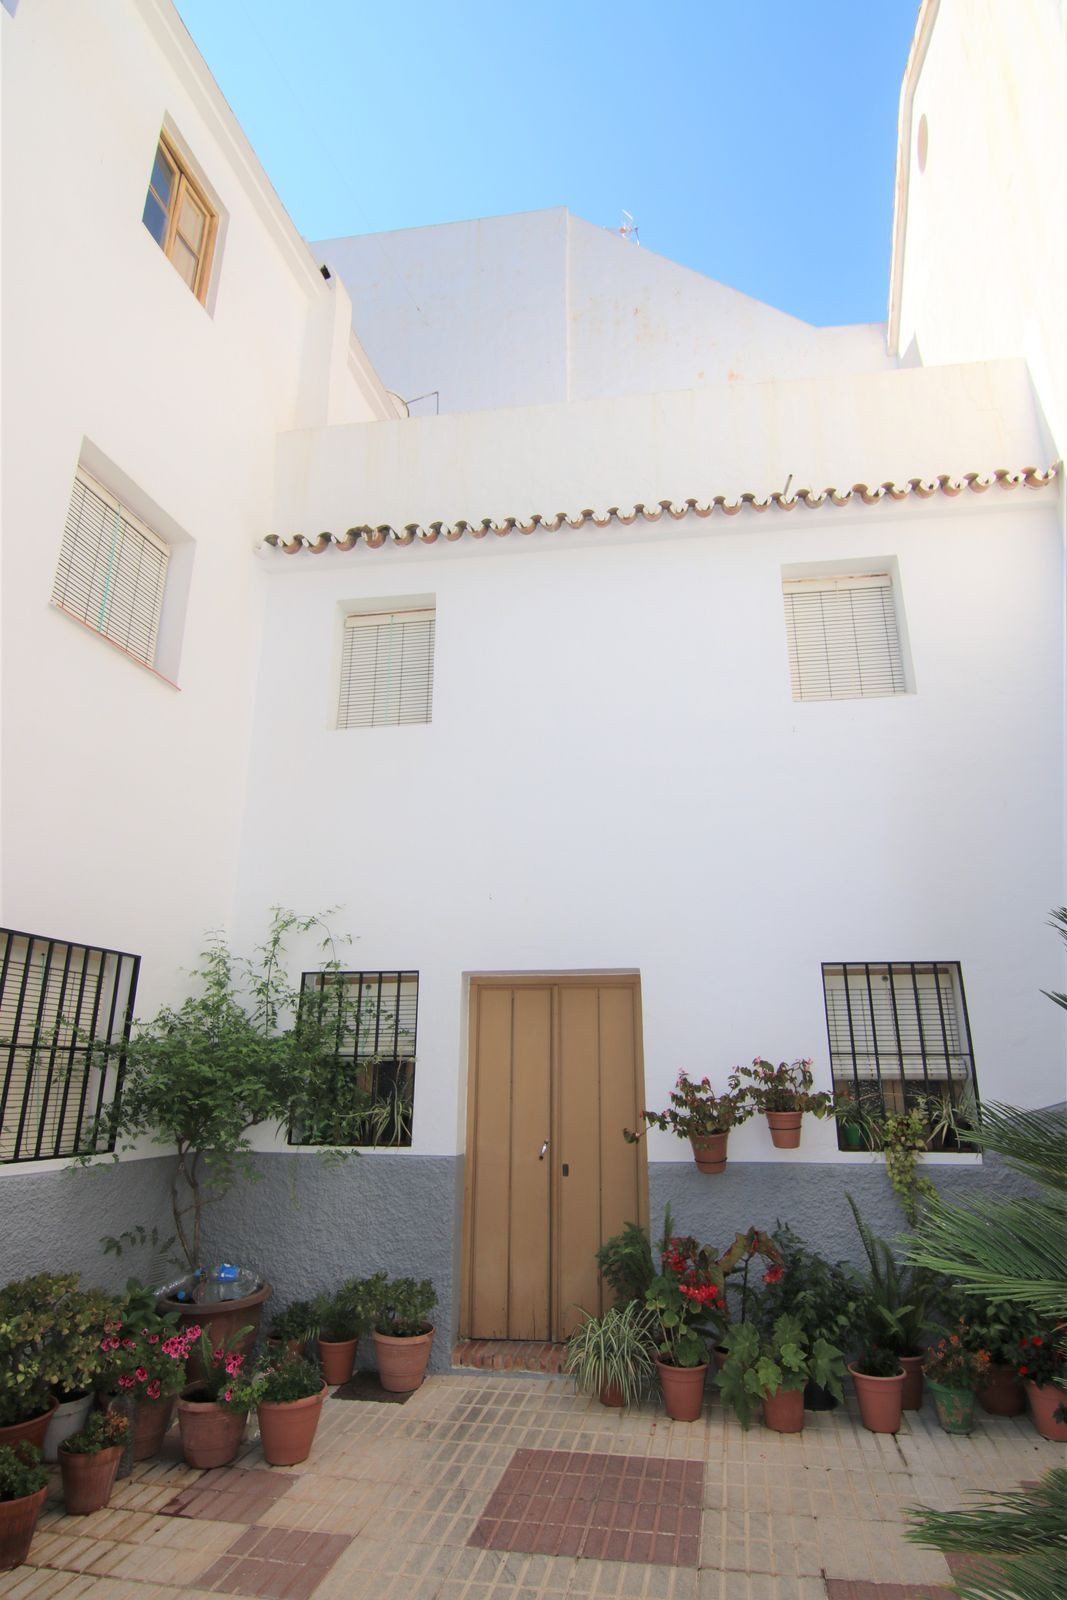 6 Bedroom Terraced Townhouse For Sale Tolox